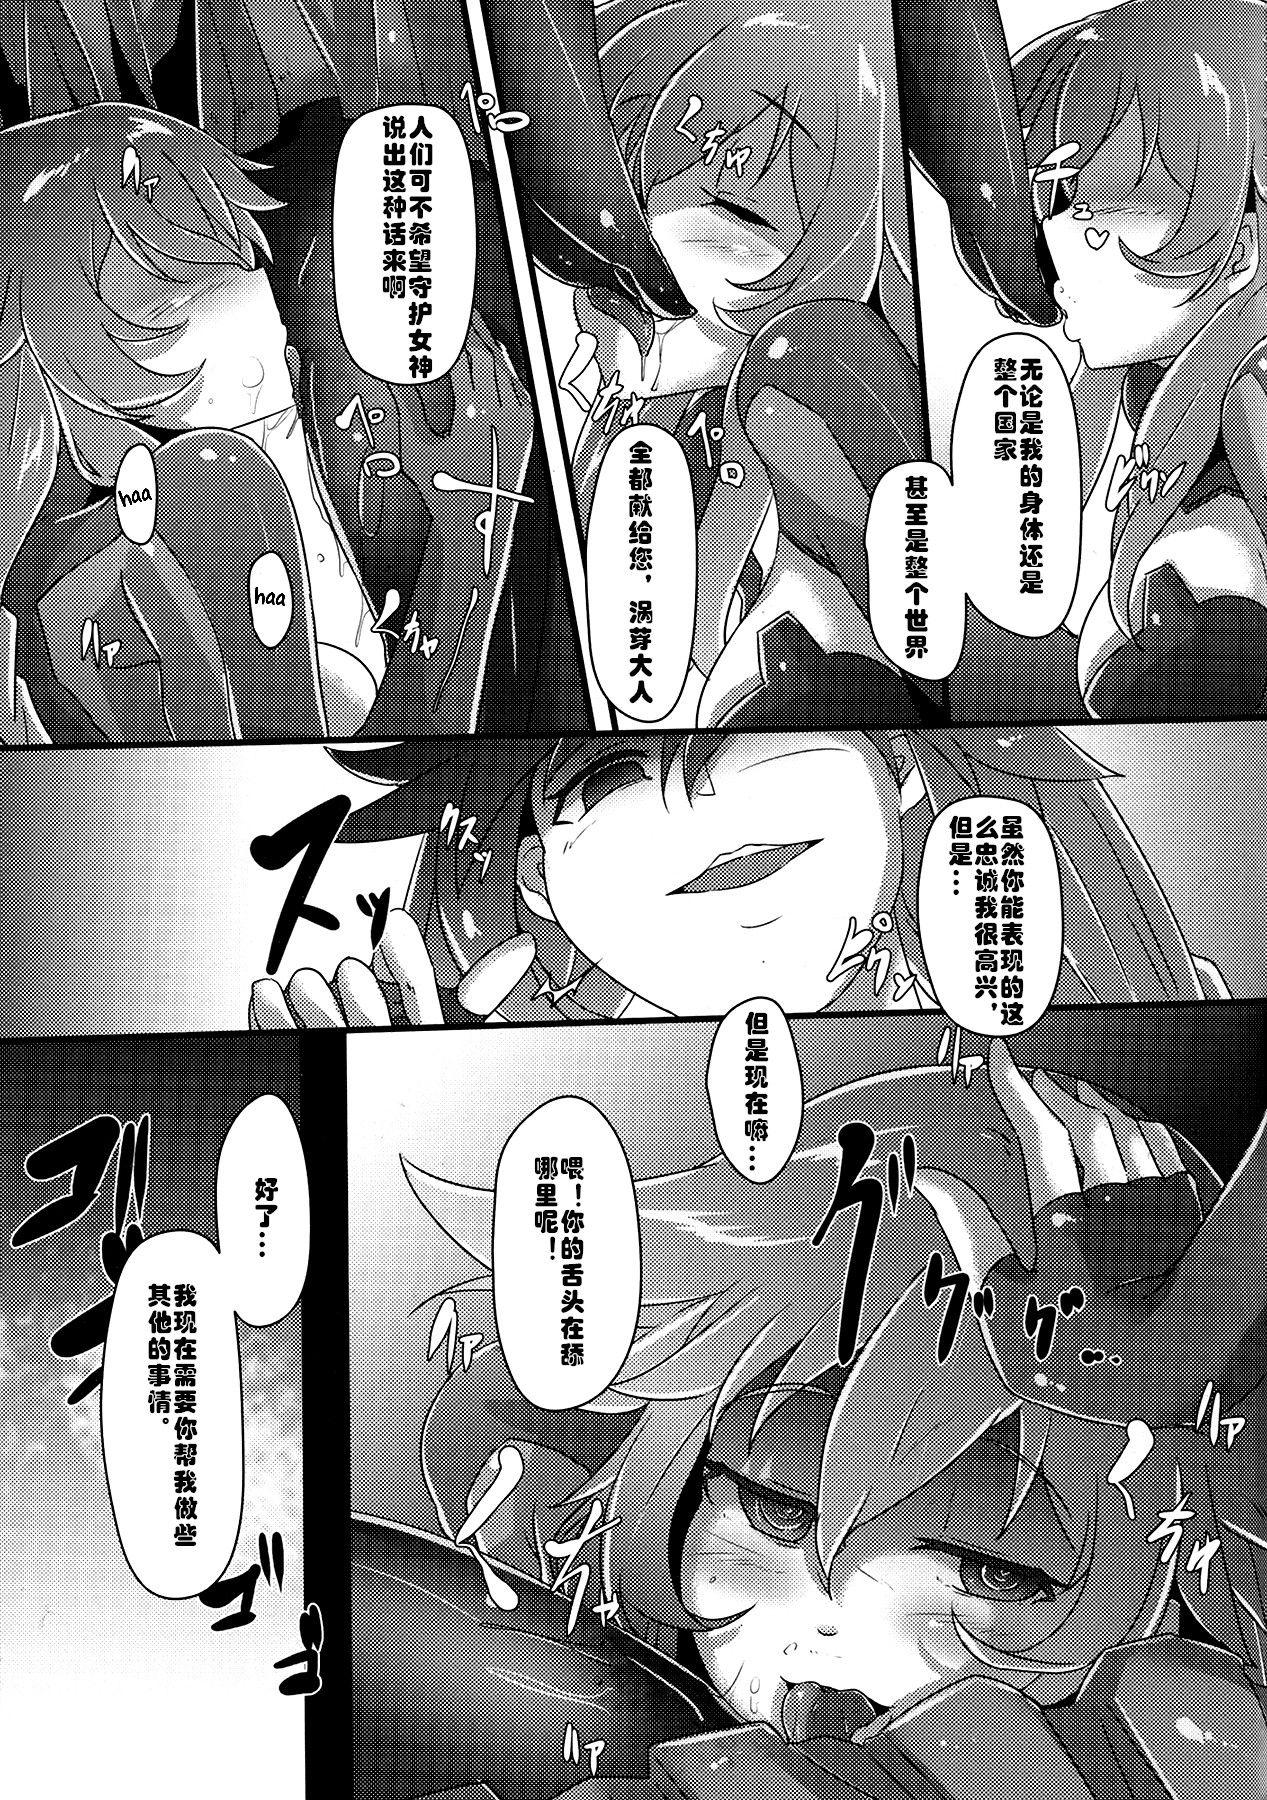 Office Sex After the Nightmare - Hyperdimension neptunia Spy Camera - Page 5